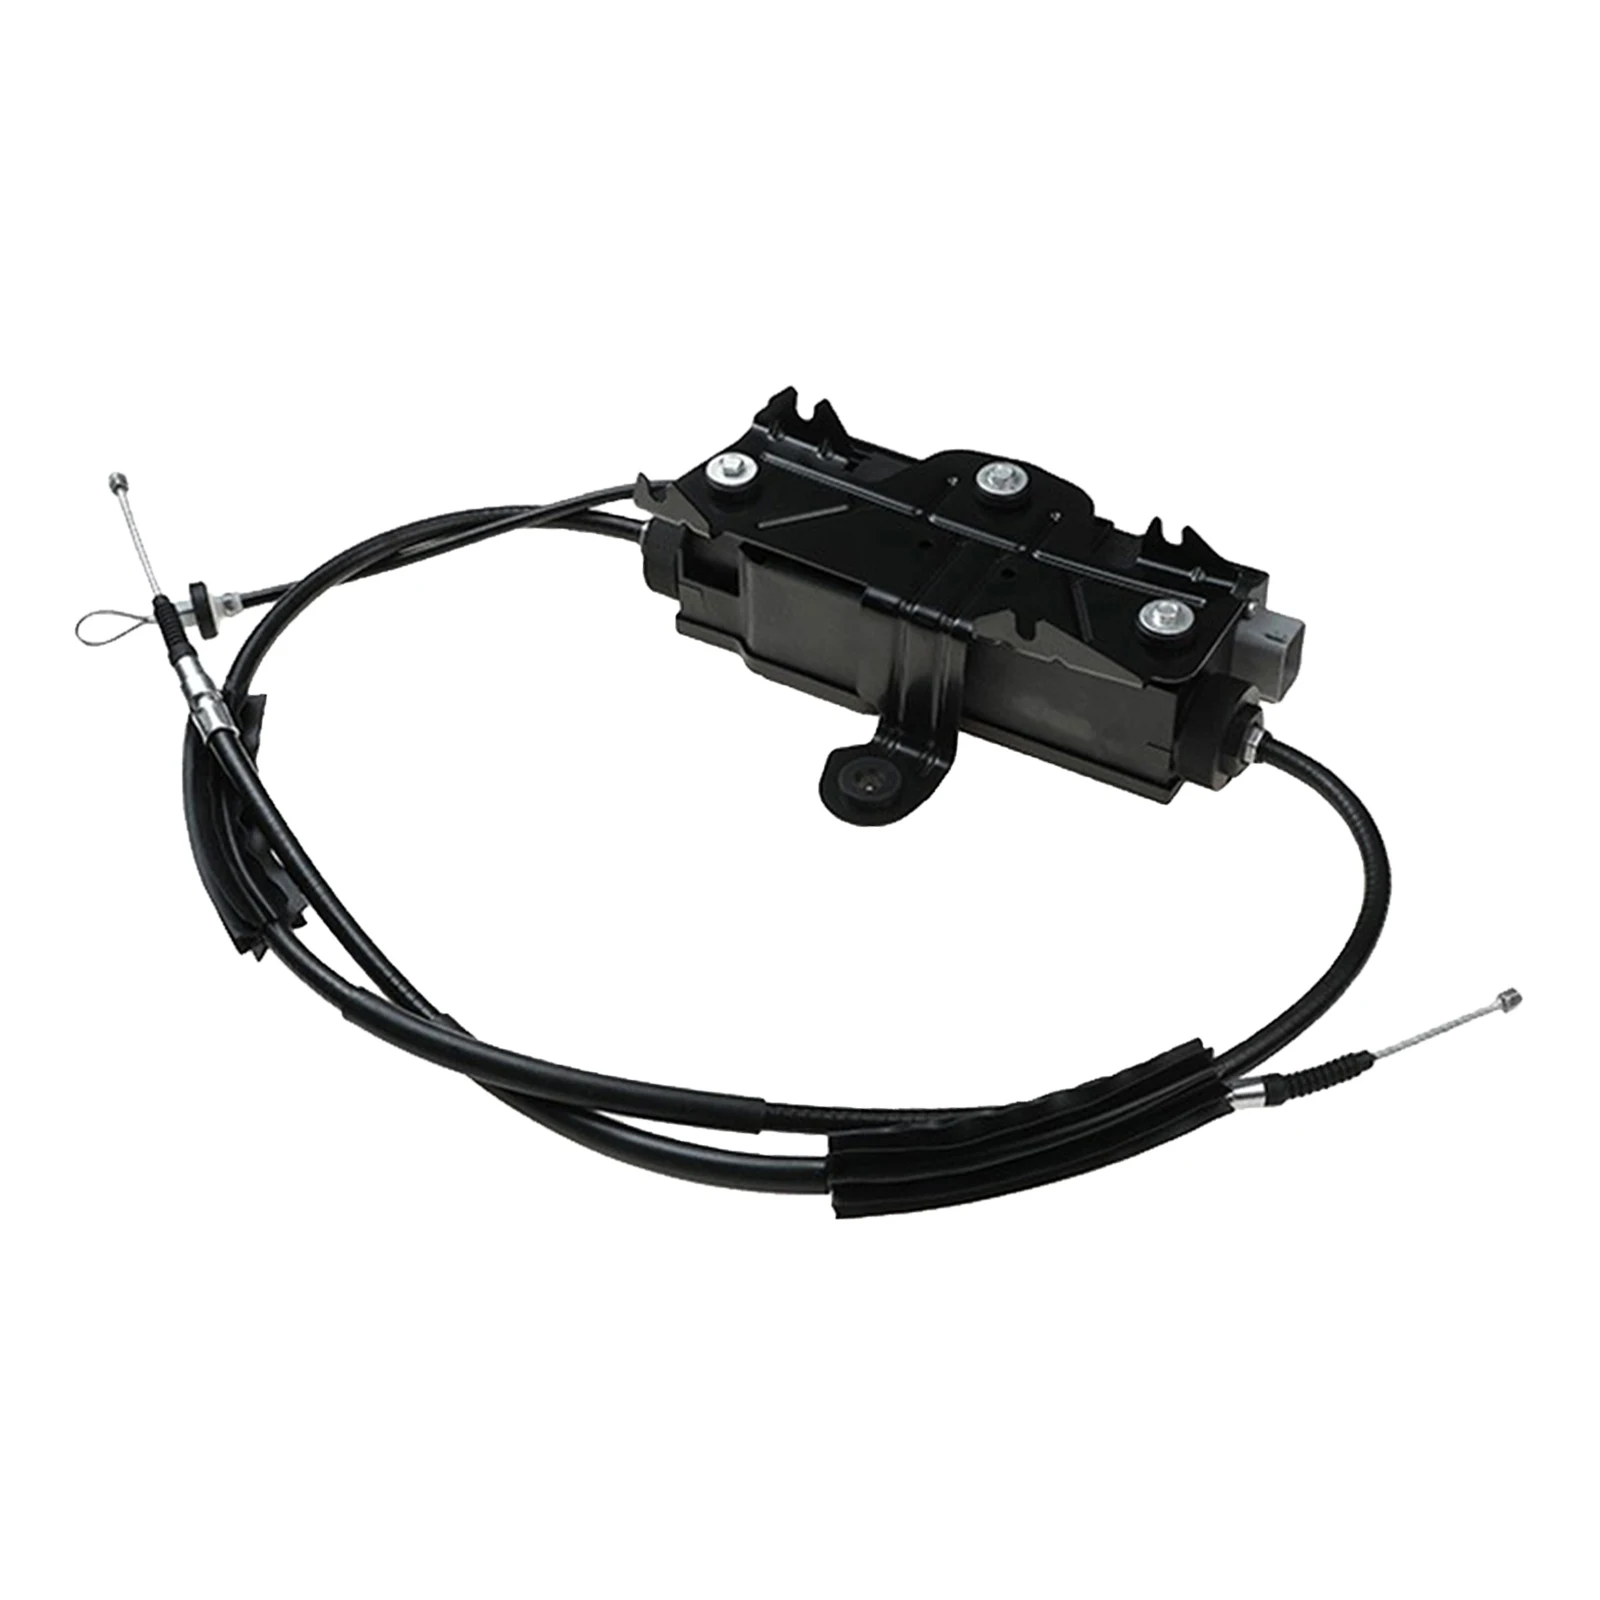 Park Brake Module Hand Brake Actuator Parking Brake Actuator With Control Unit for BMW 7 Series F01 F02 Easy to Install